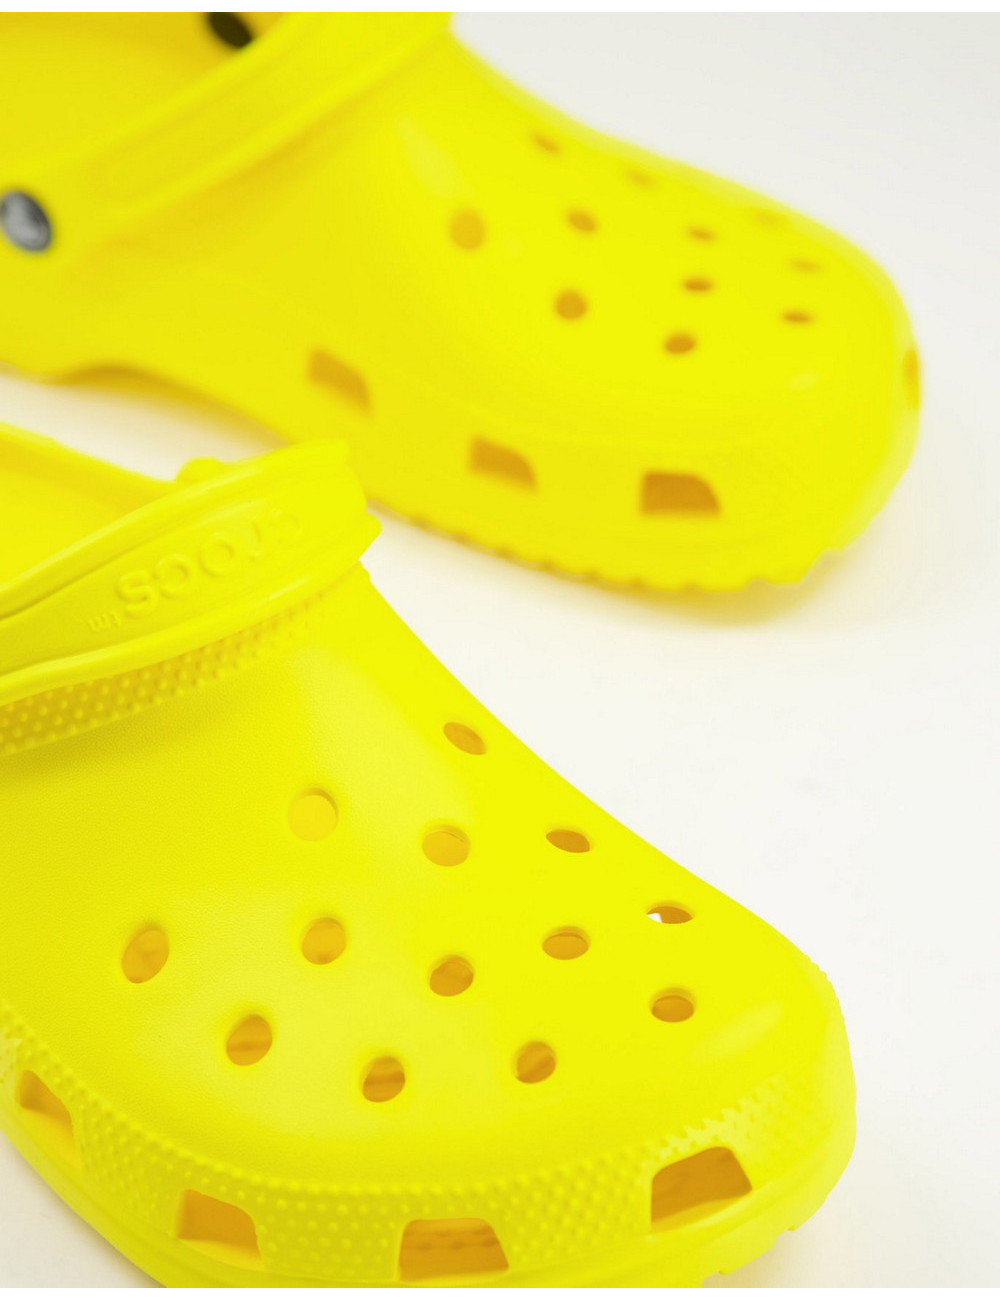 Crocs classic shoes in yellow